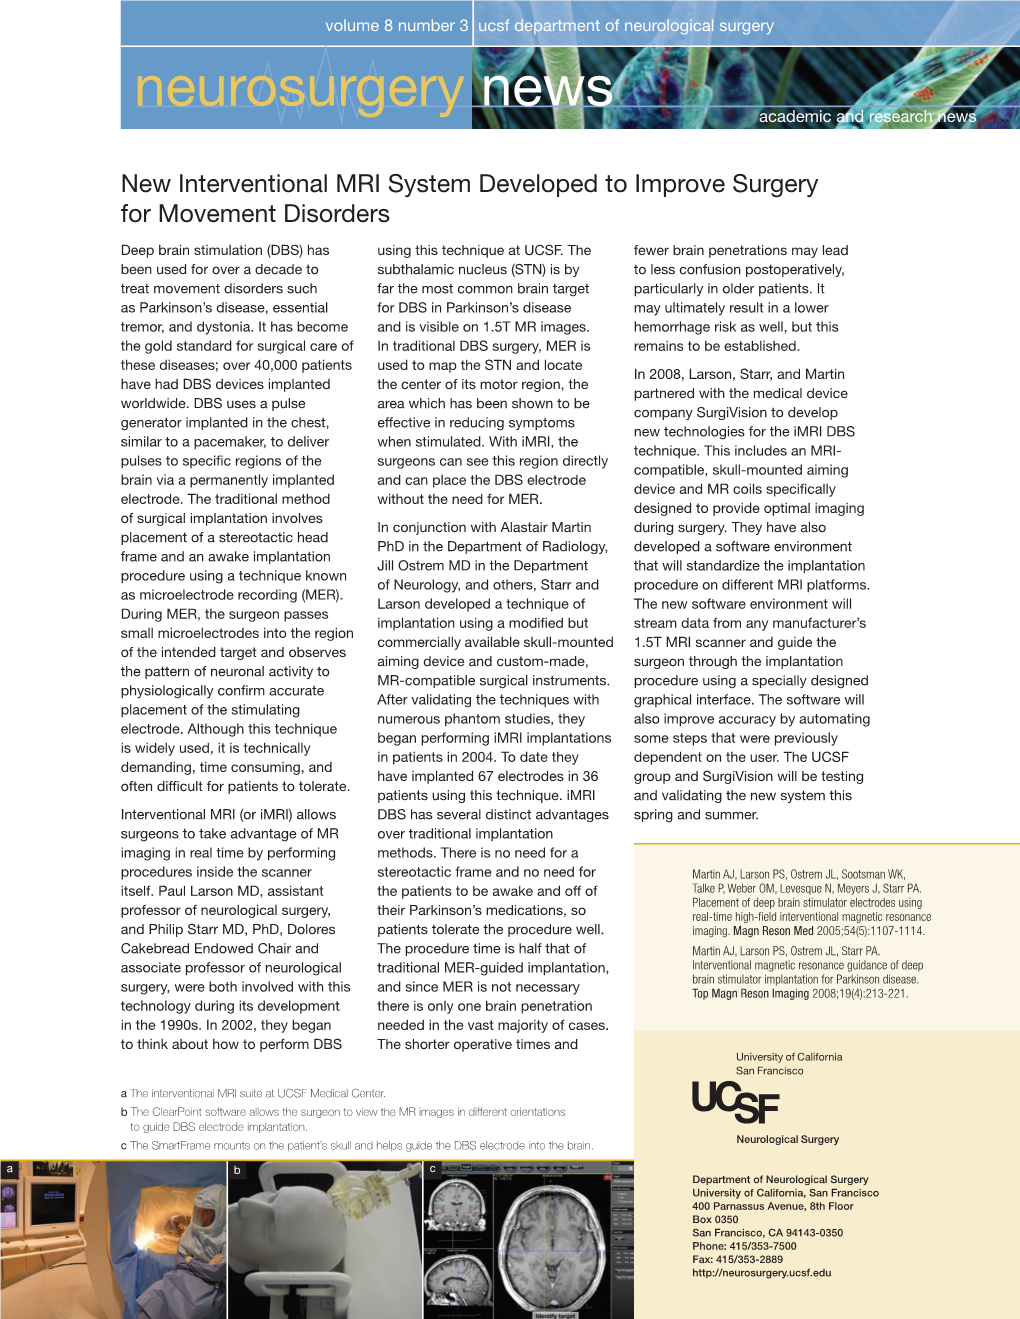 Neurosurgery News Academic and Research News